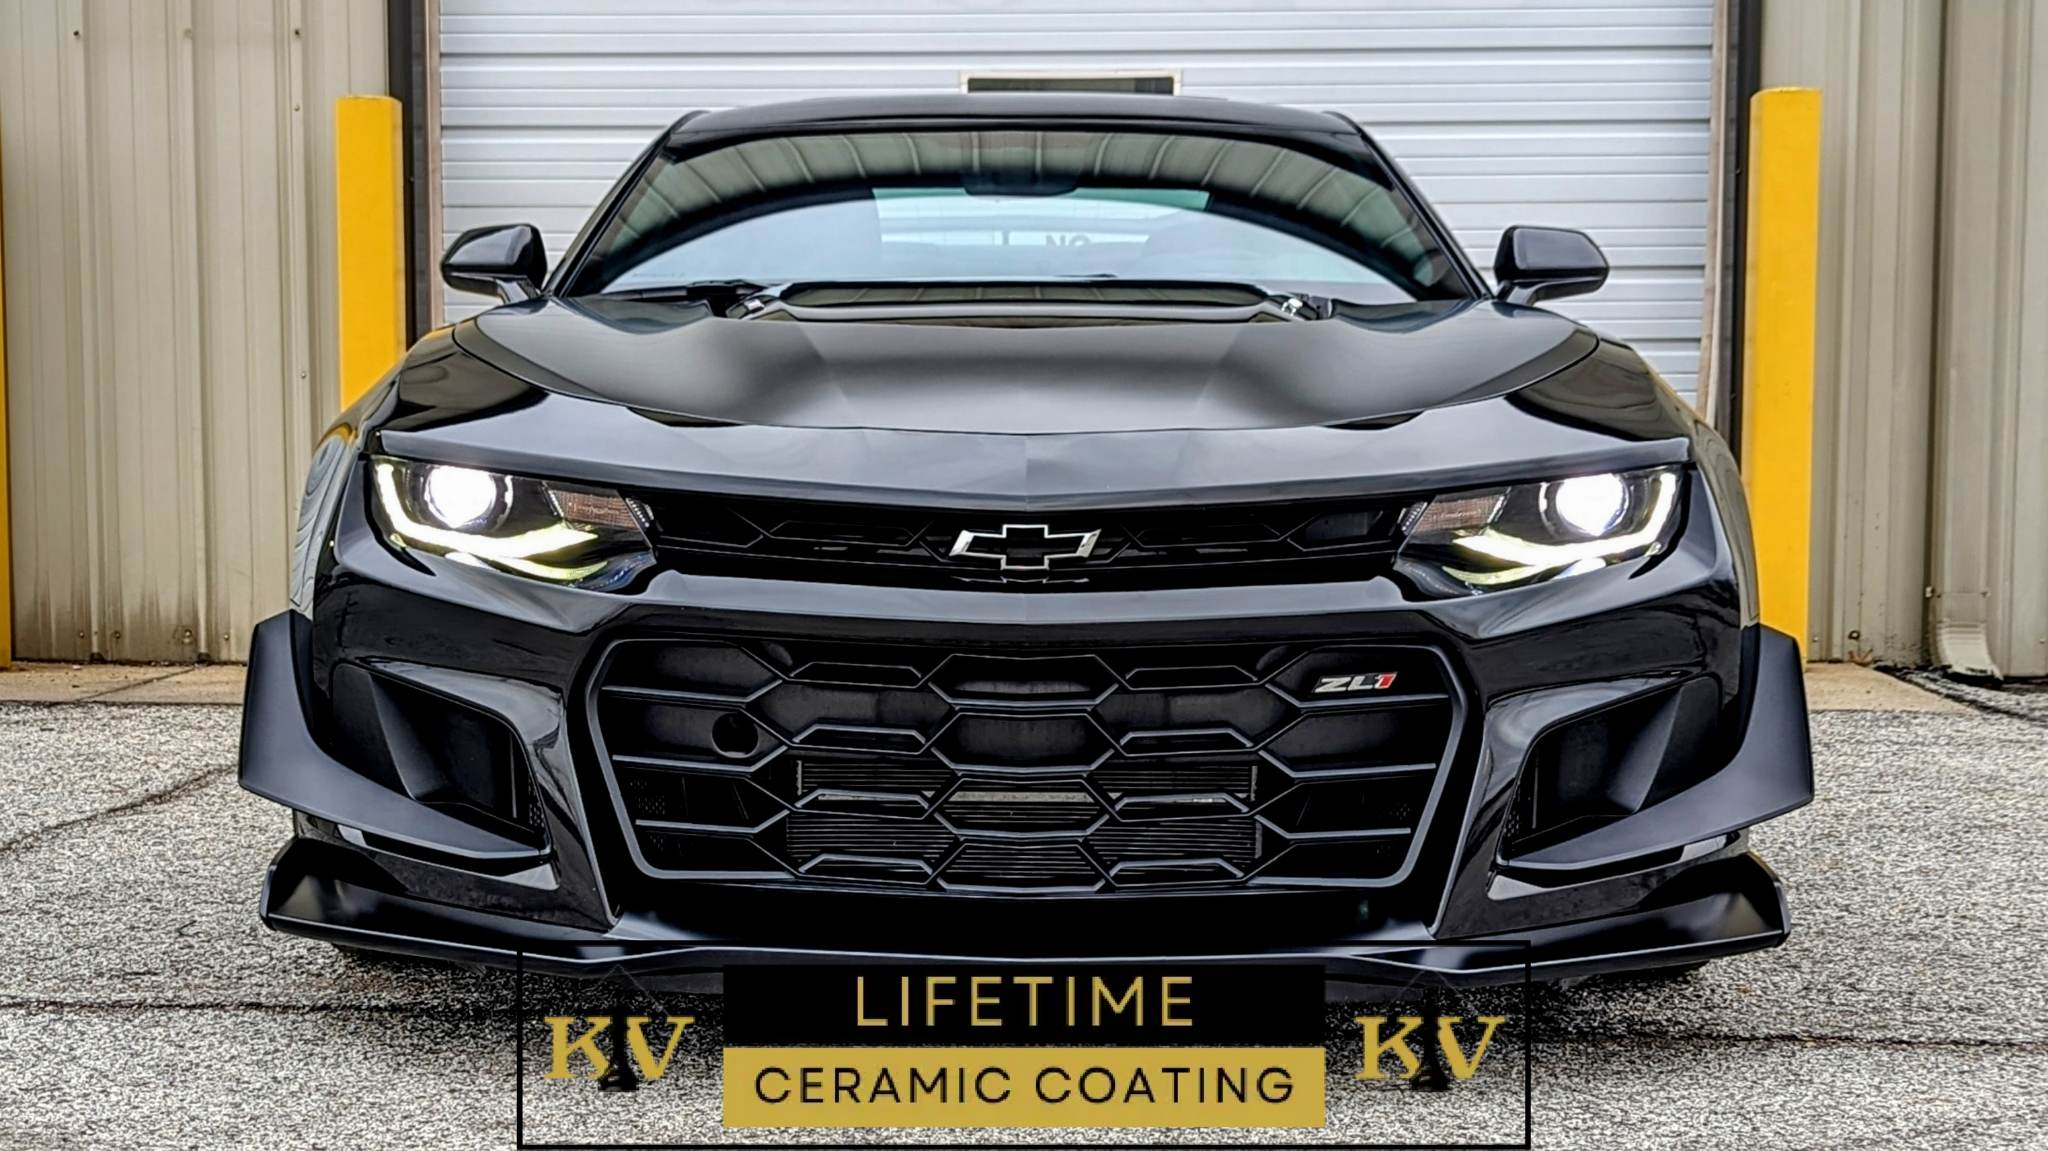 A Lifetime Ceramic Coating From Kings Valet is the Best Paint Protection Near You!